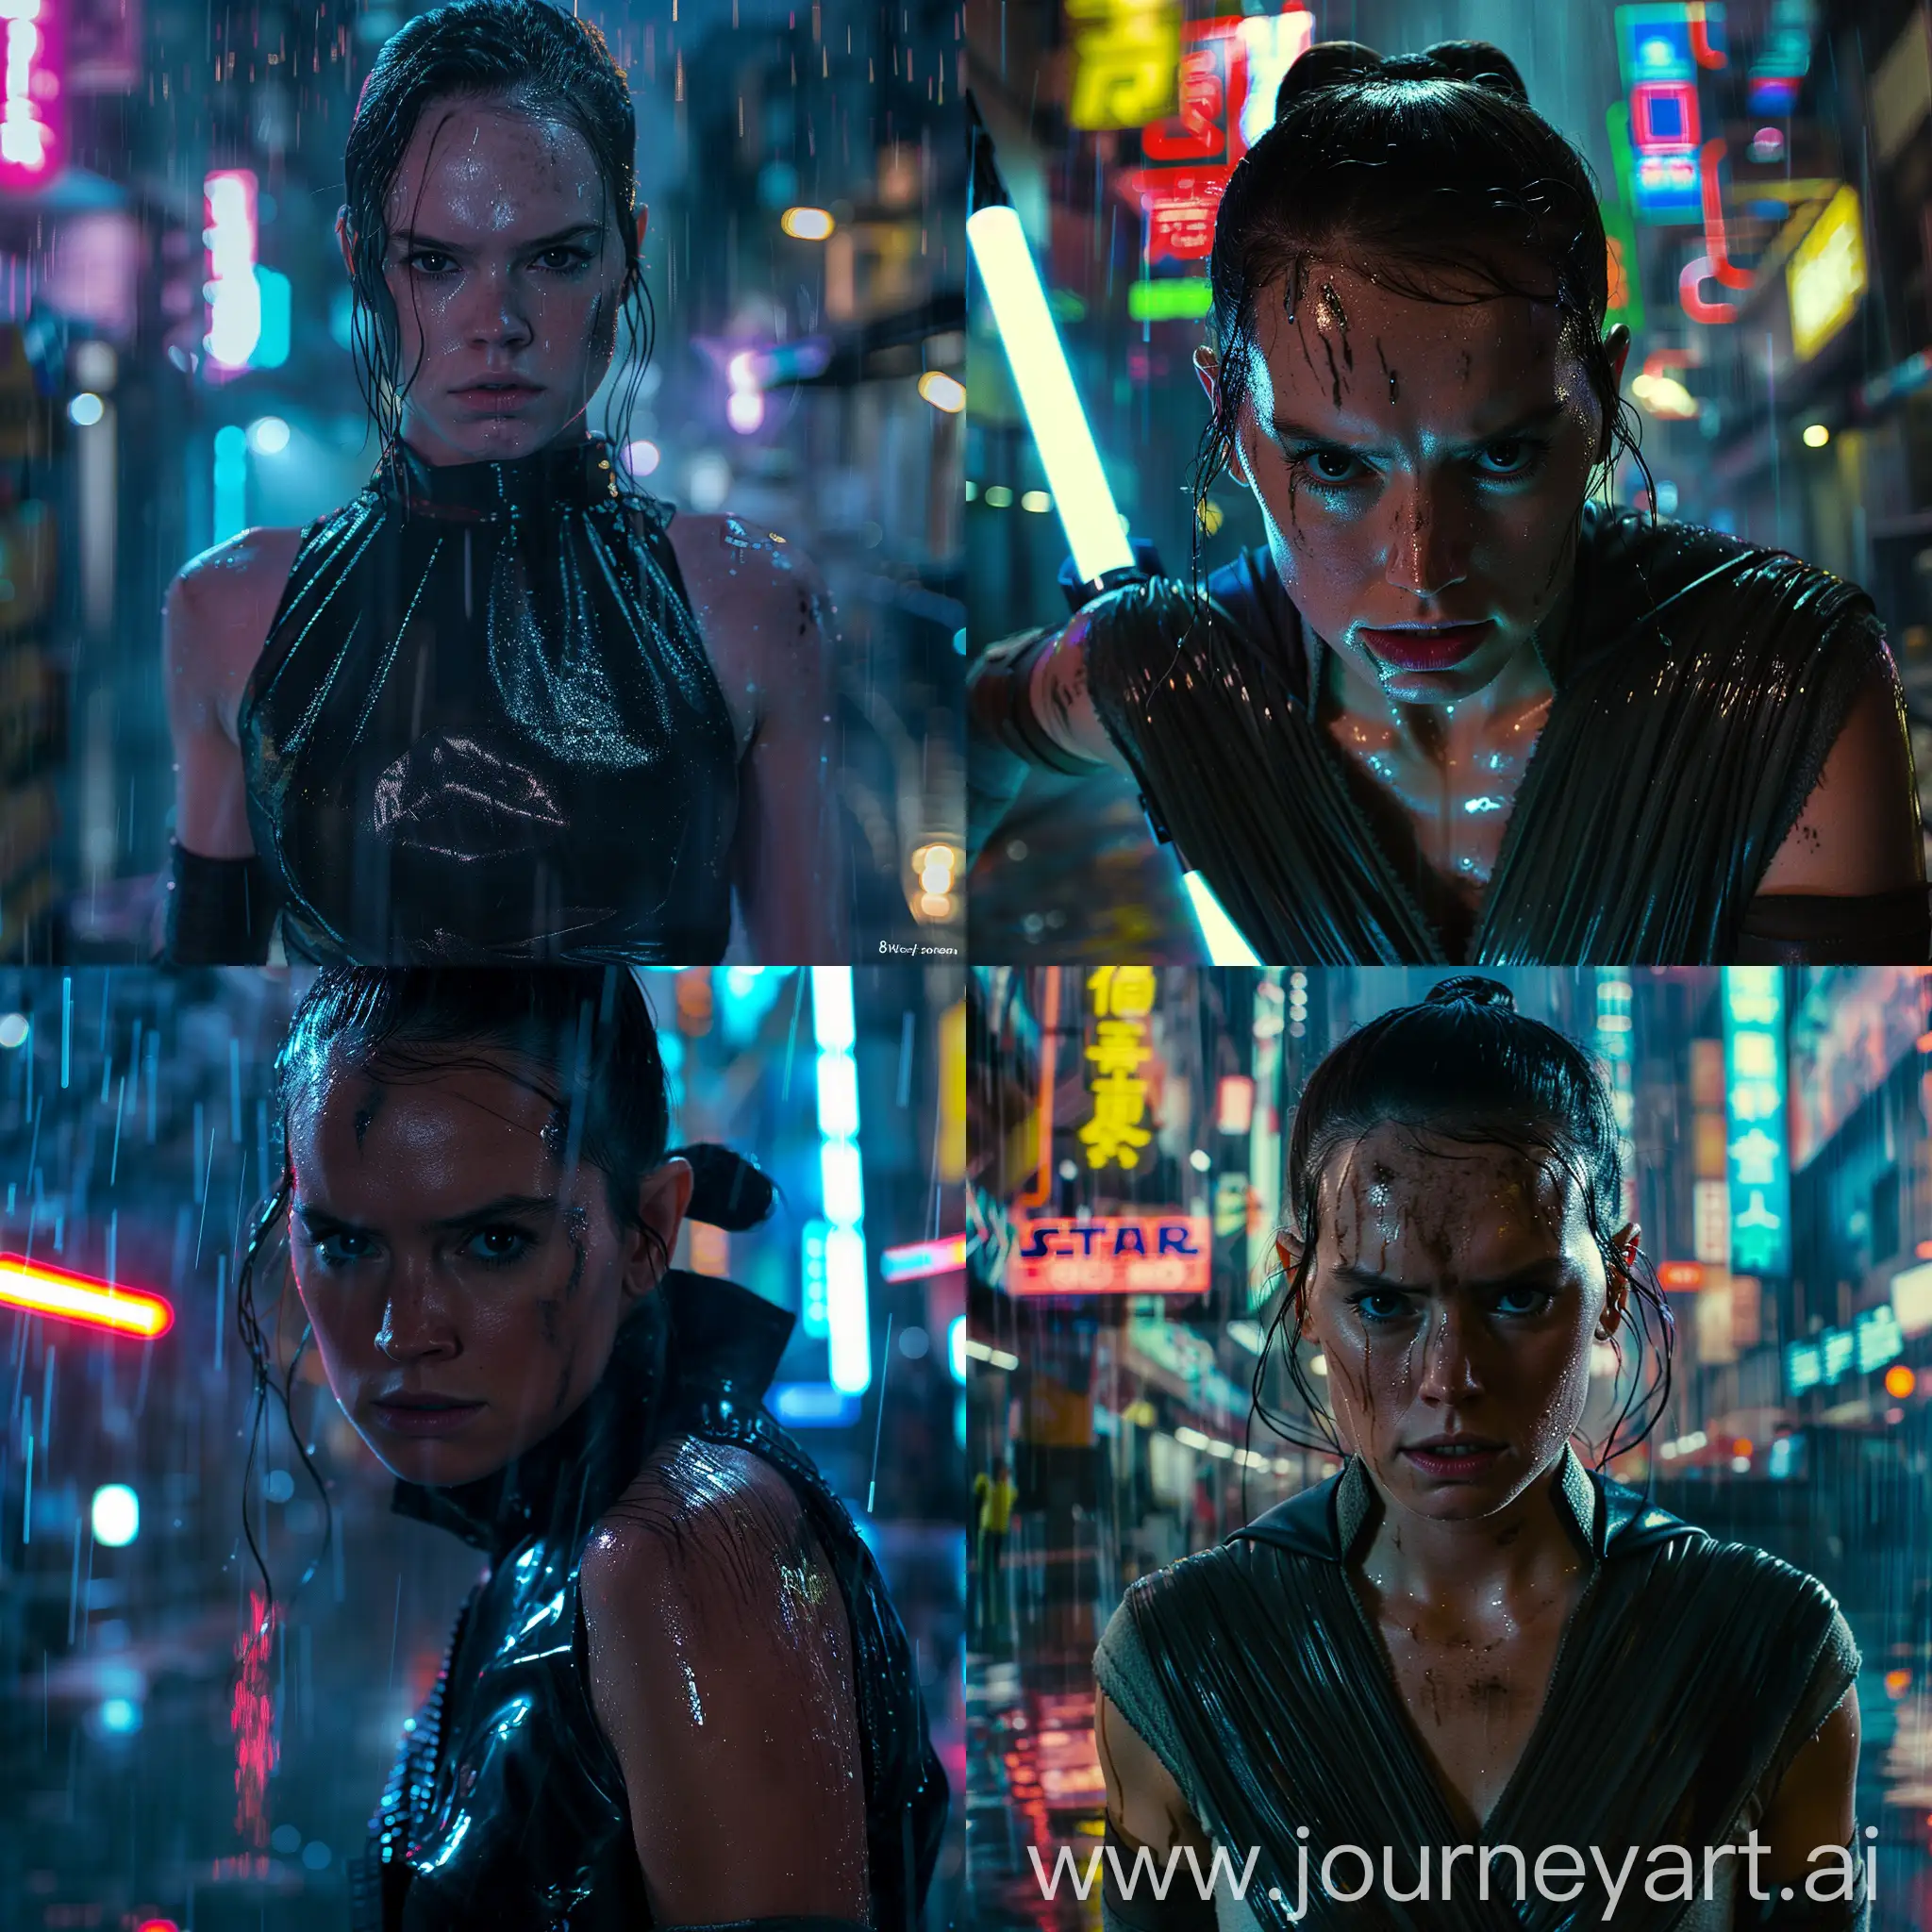 Daisy Ridley With Rey Skywalker's face,, With wet Black leather in cyberpunk city With neon , With neon lights reflecting in her wet face in The rain, looking at The camera, angle focusing from the waist up, 8k resolution